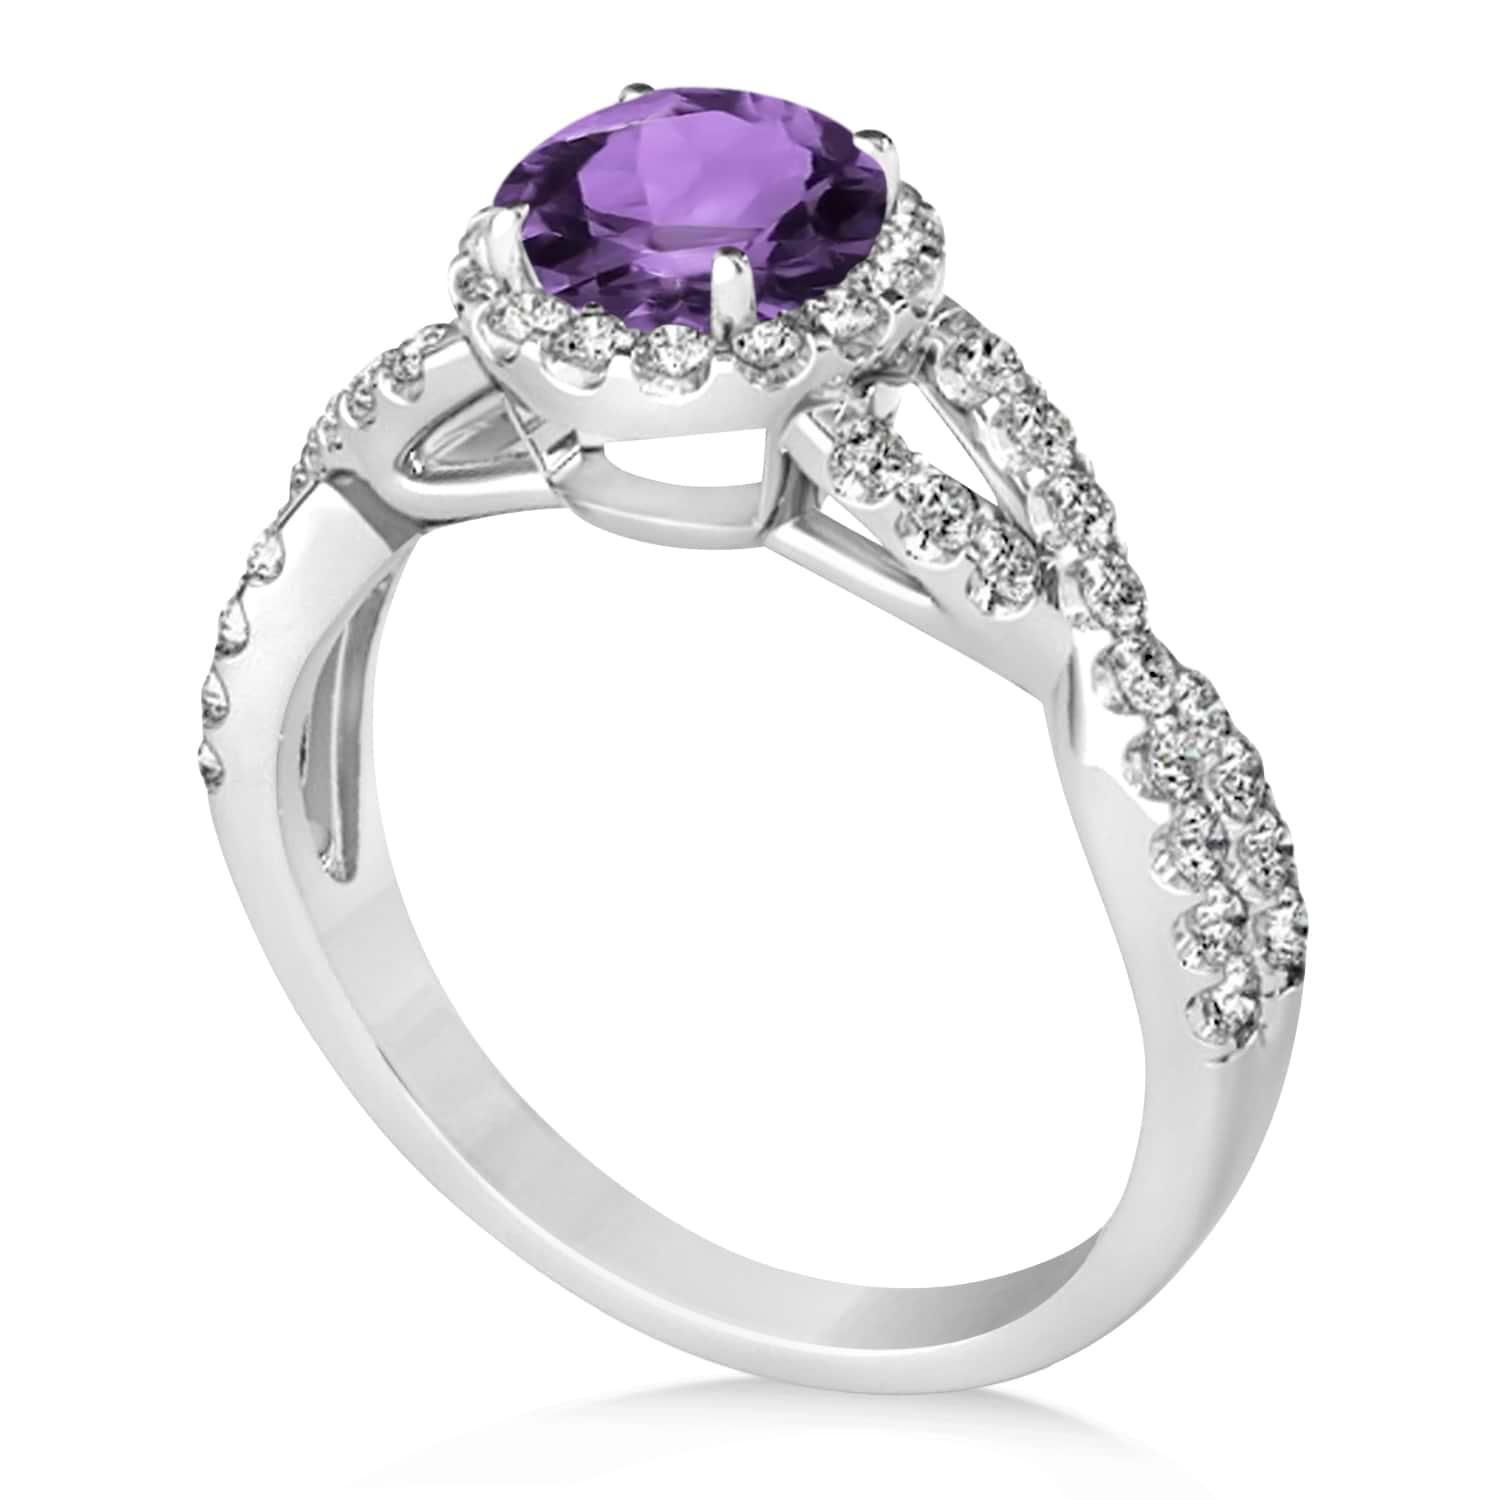 Amethyst & Diamond Twisted Engagement Ring 14k White Gold 1.20ct